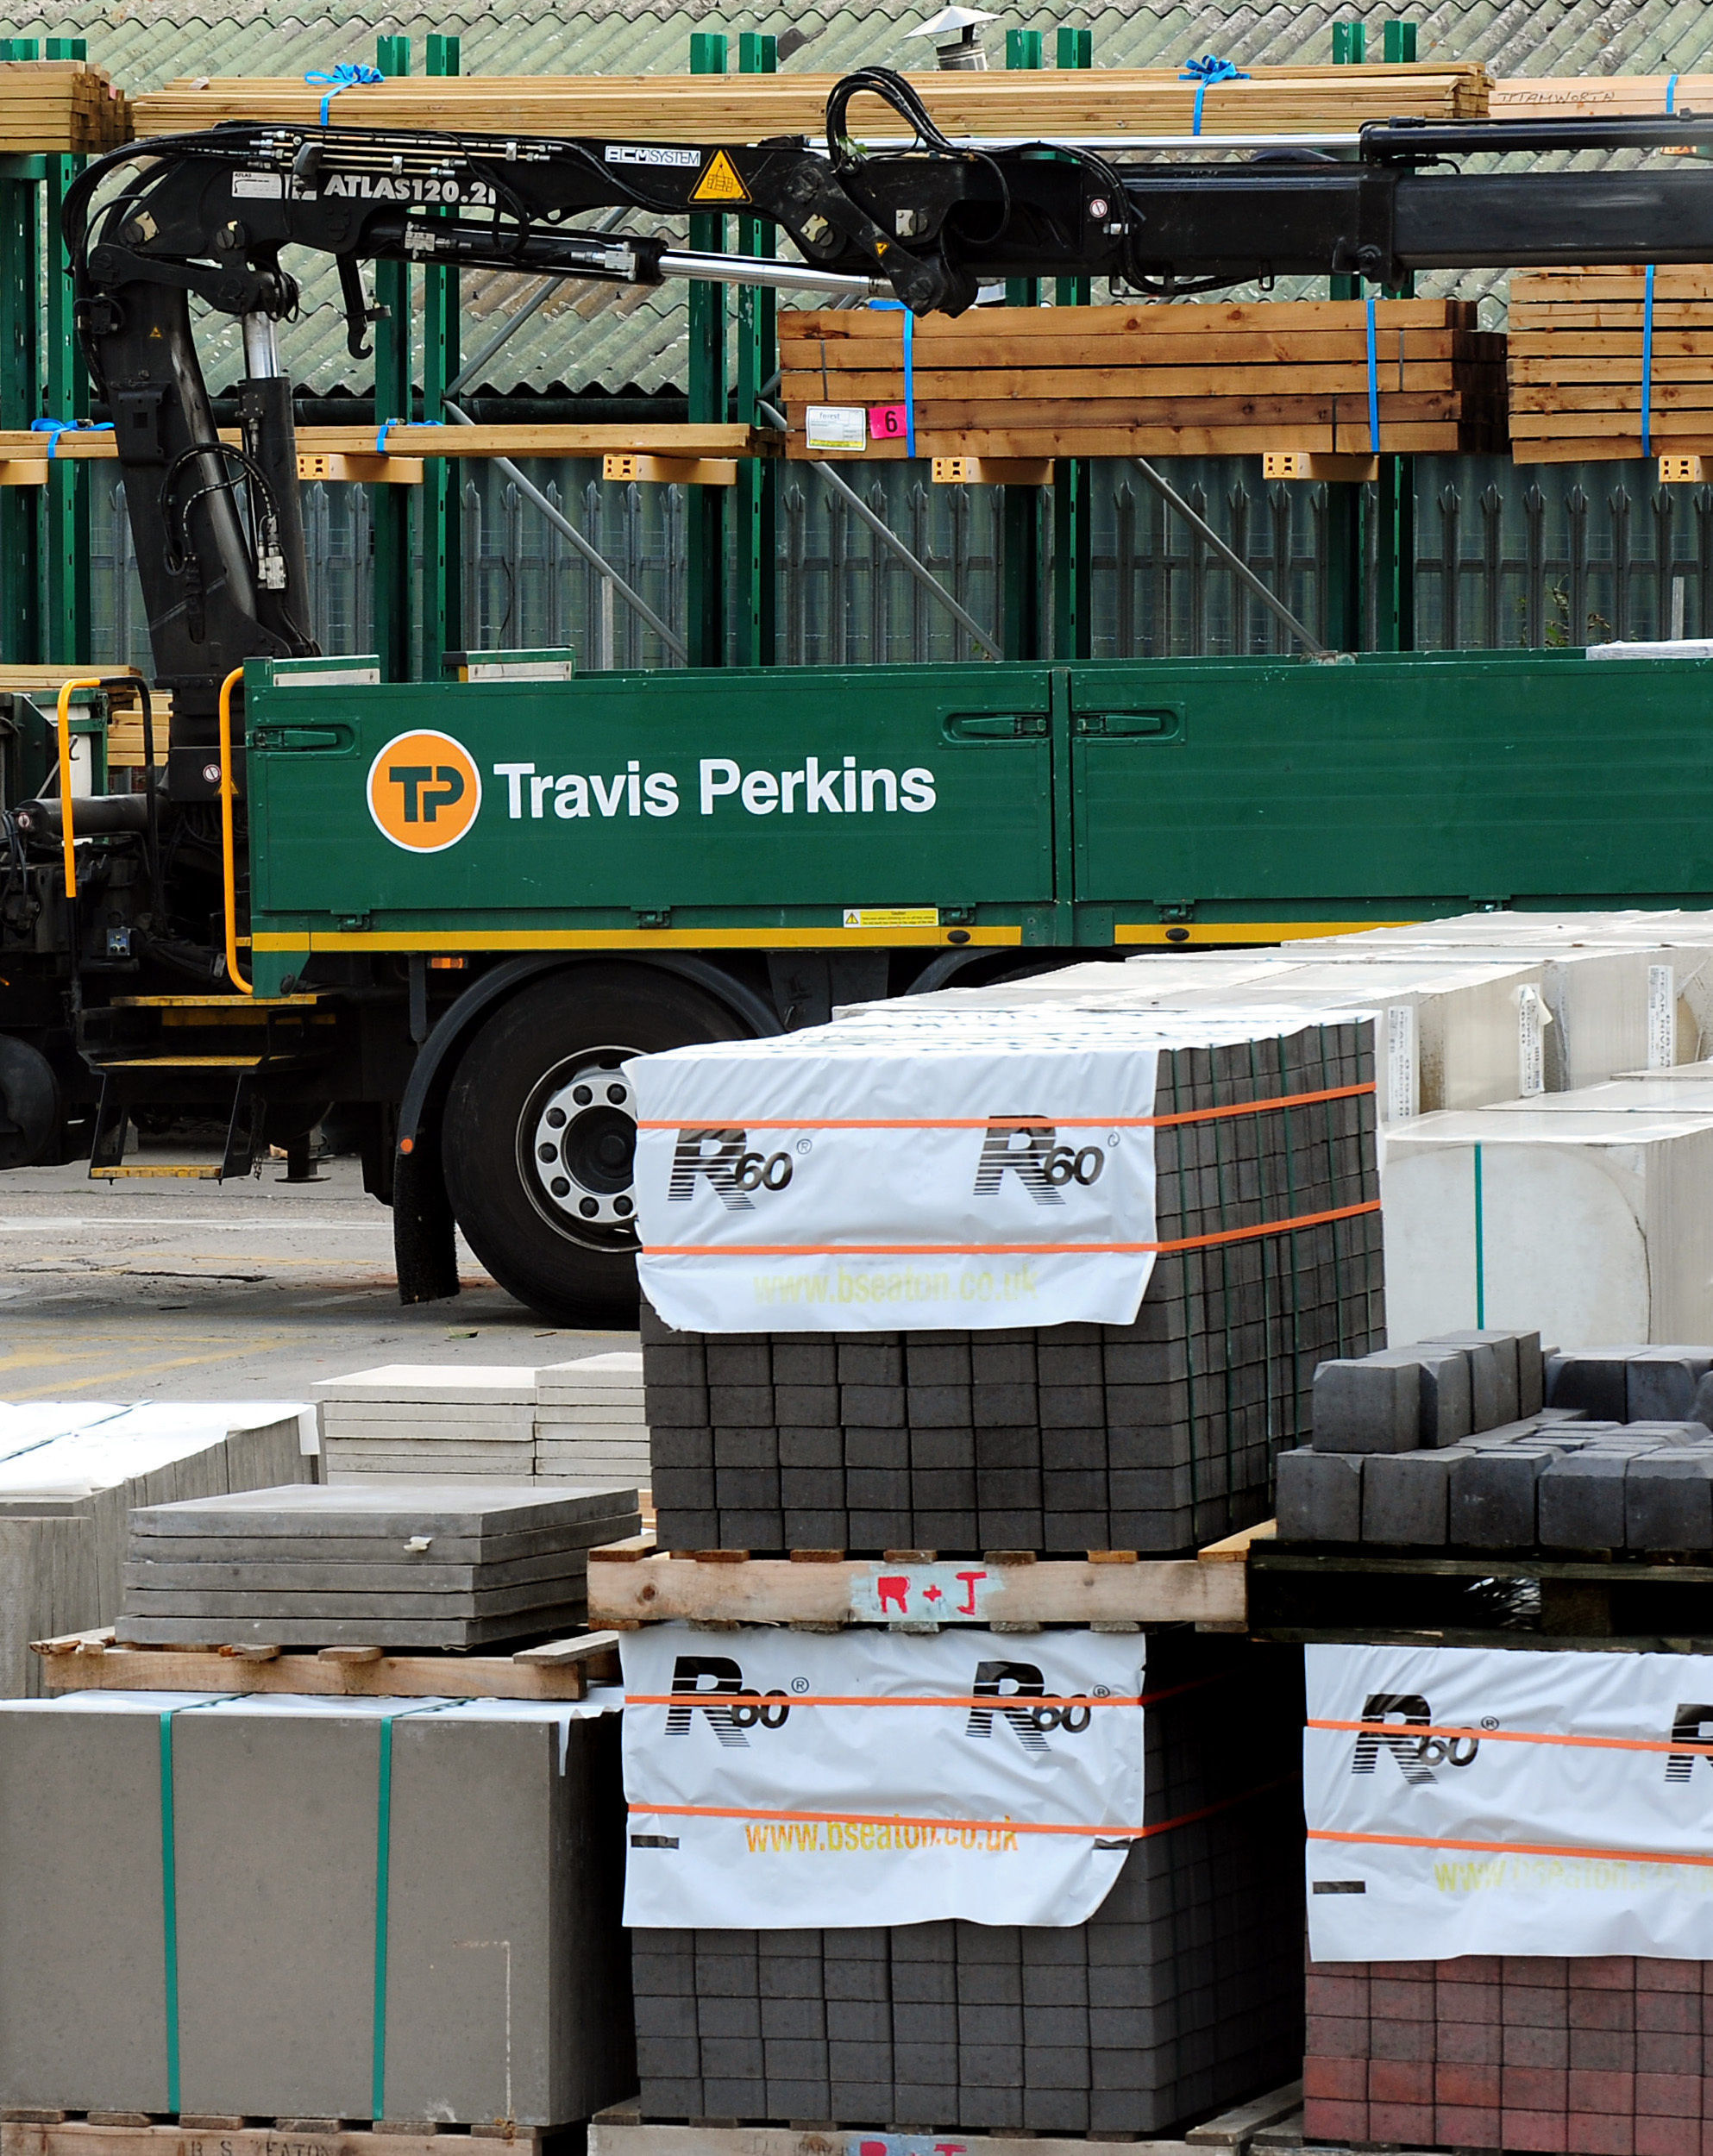 600 jobs affected as Travis Perkins to close branches - Harrow Times